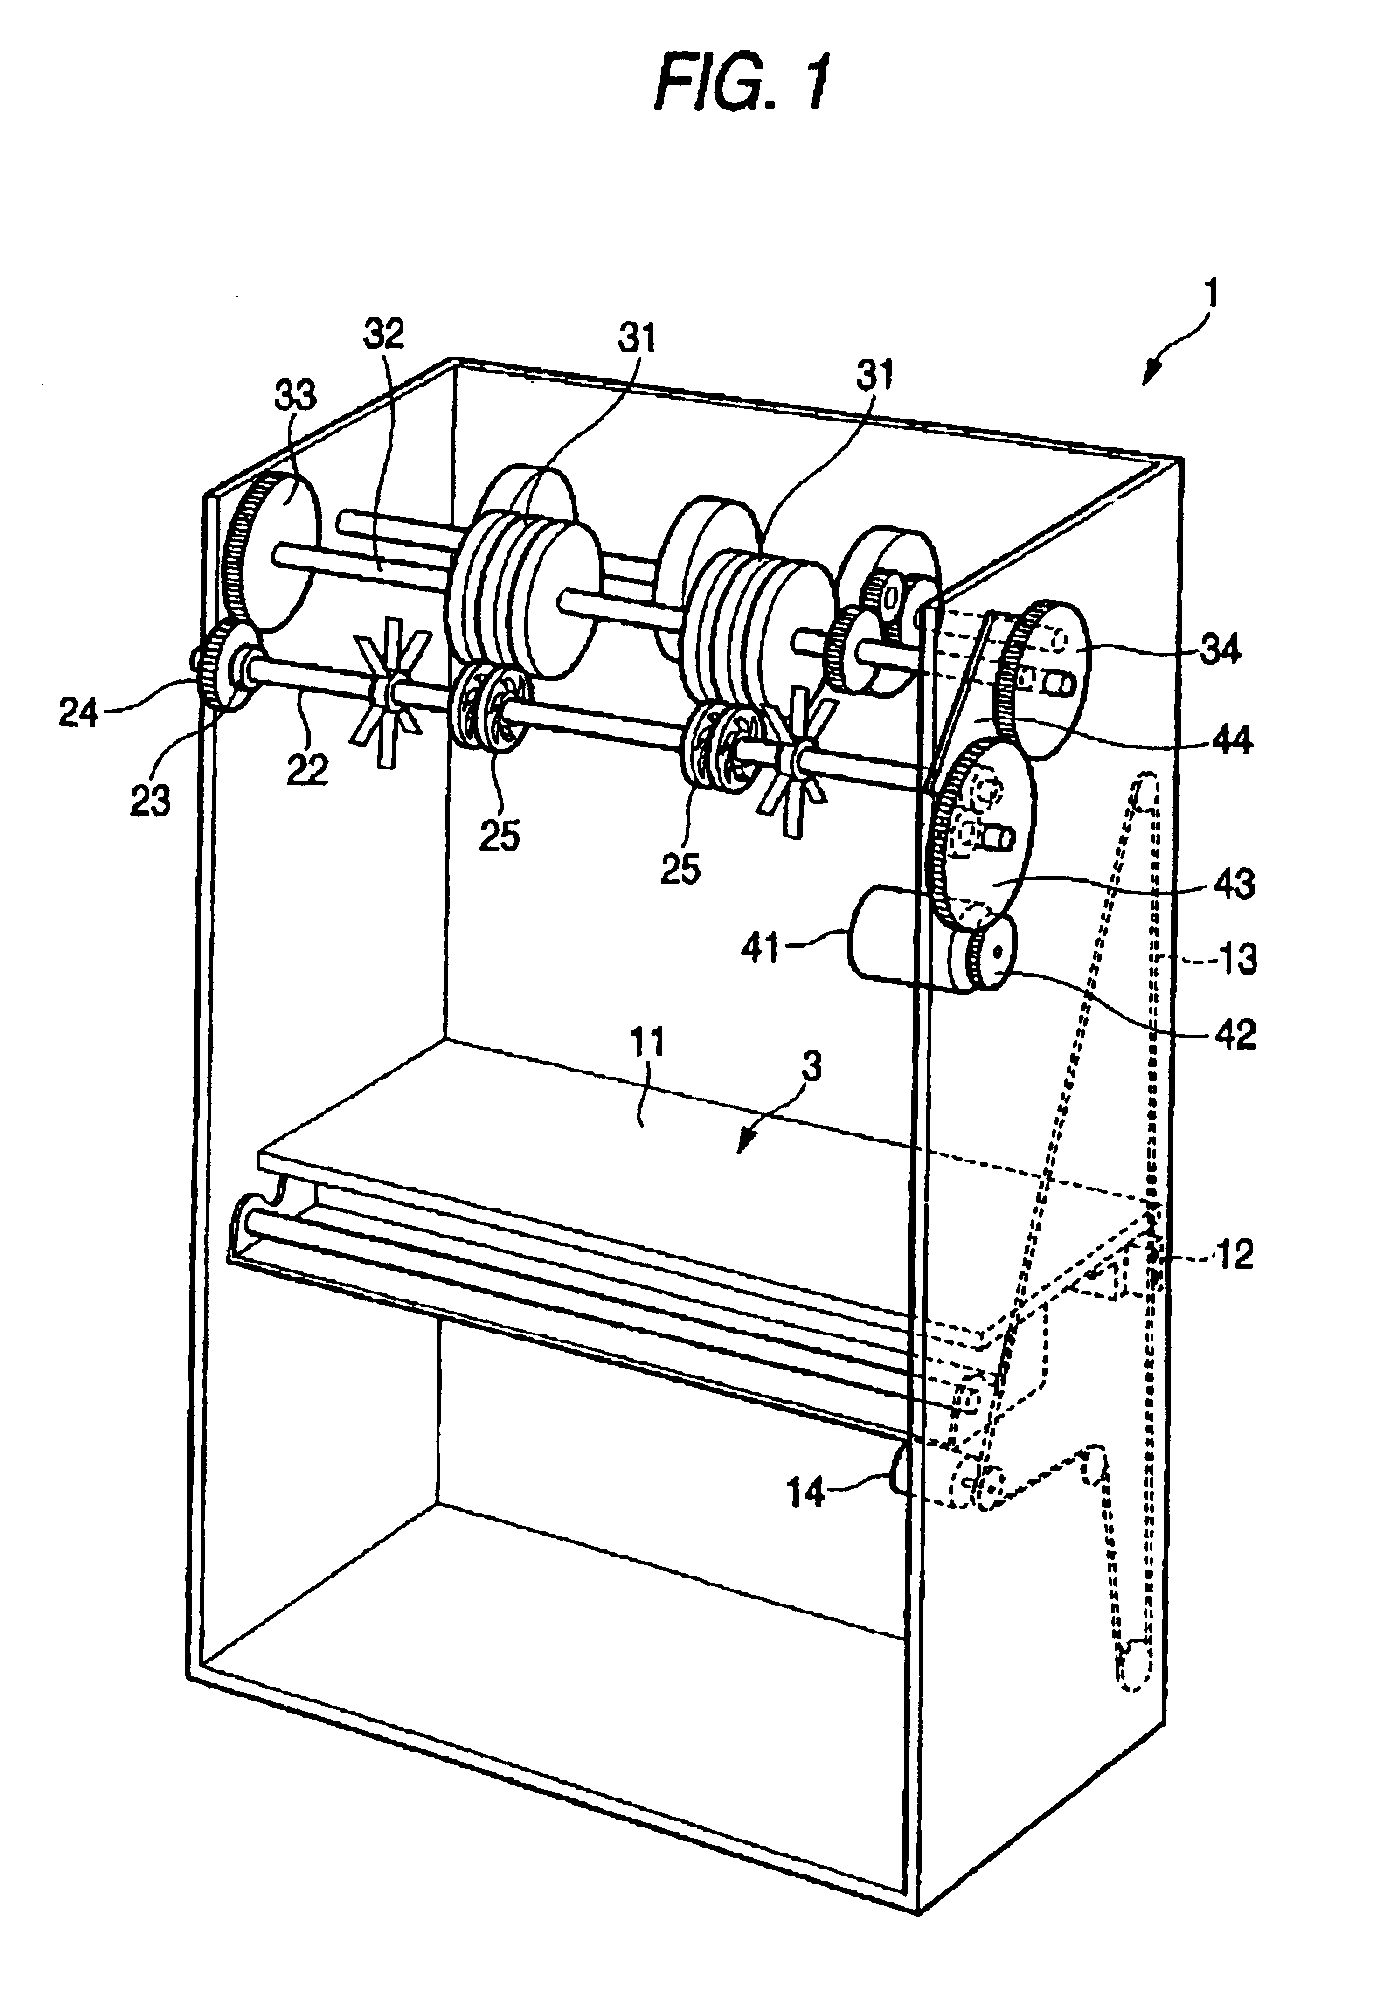 Roller and sheet delivery unit